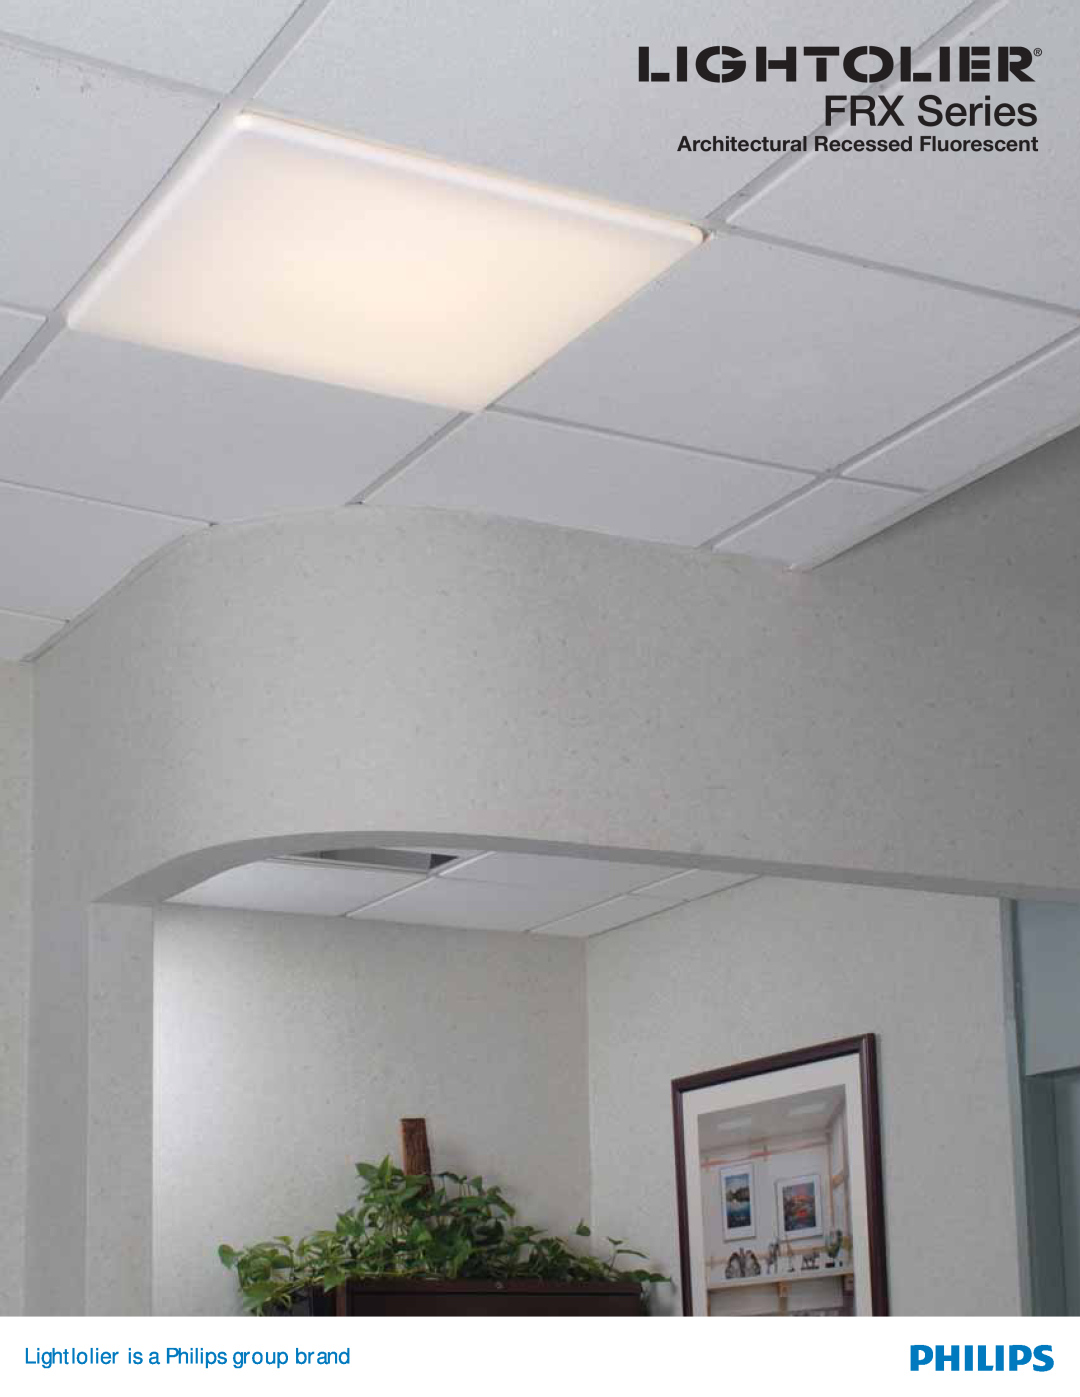 Lightolier FRX Series manual Lightlolier is a Philips group brand, Architectural Recessed Fluorescent 